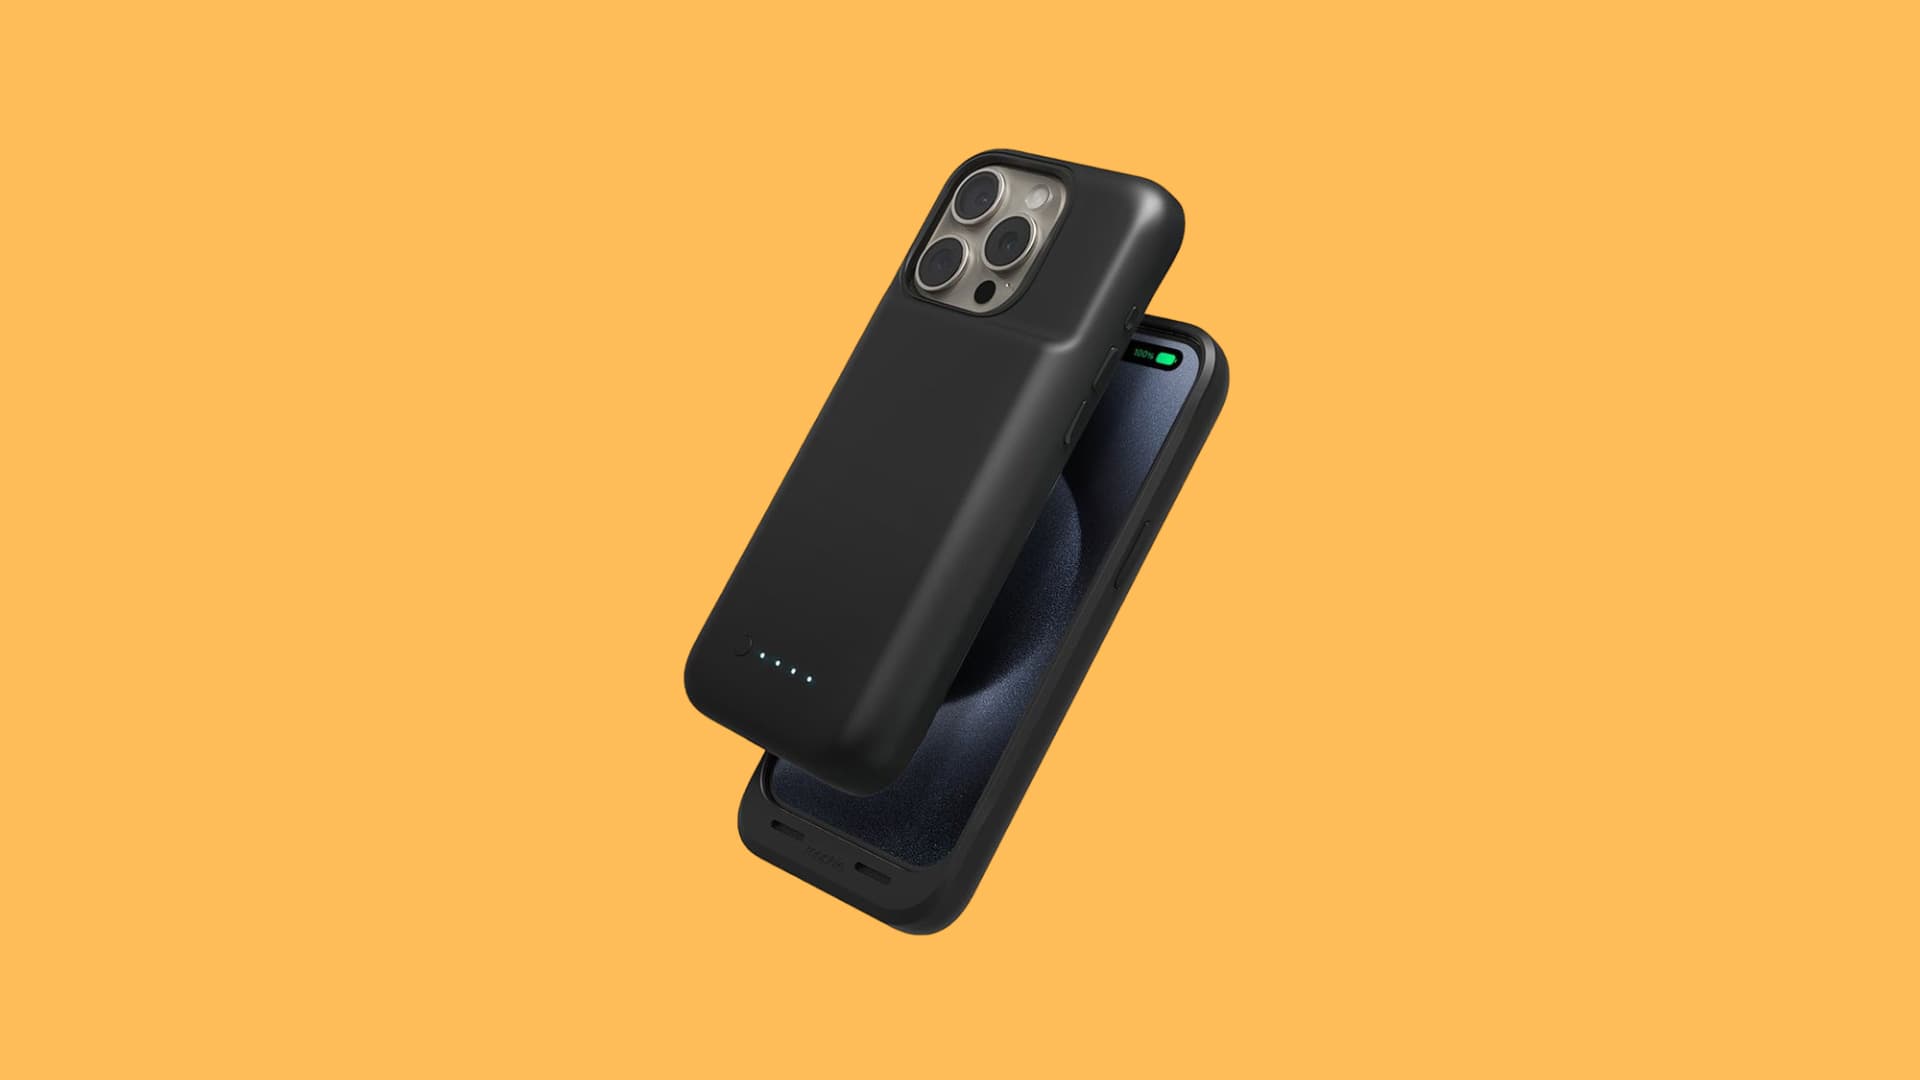 mophie’s once popular Juice Pack battery case is returning for the iPhone 15 lineup